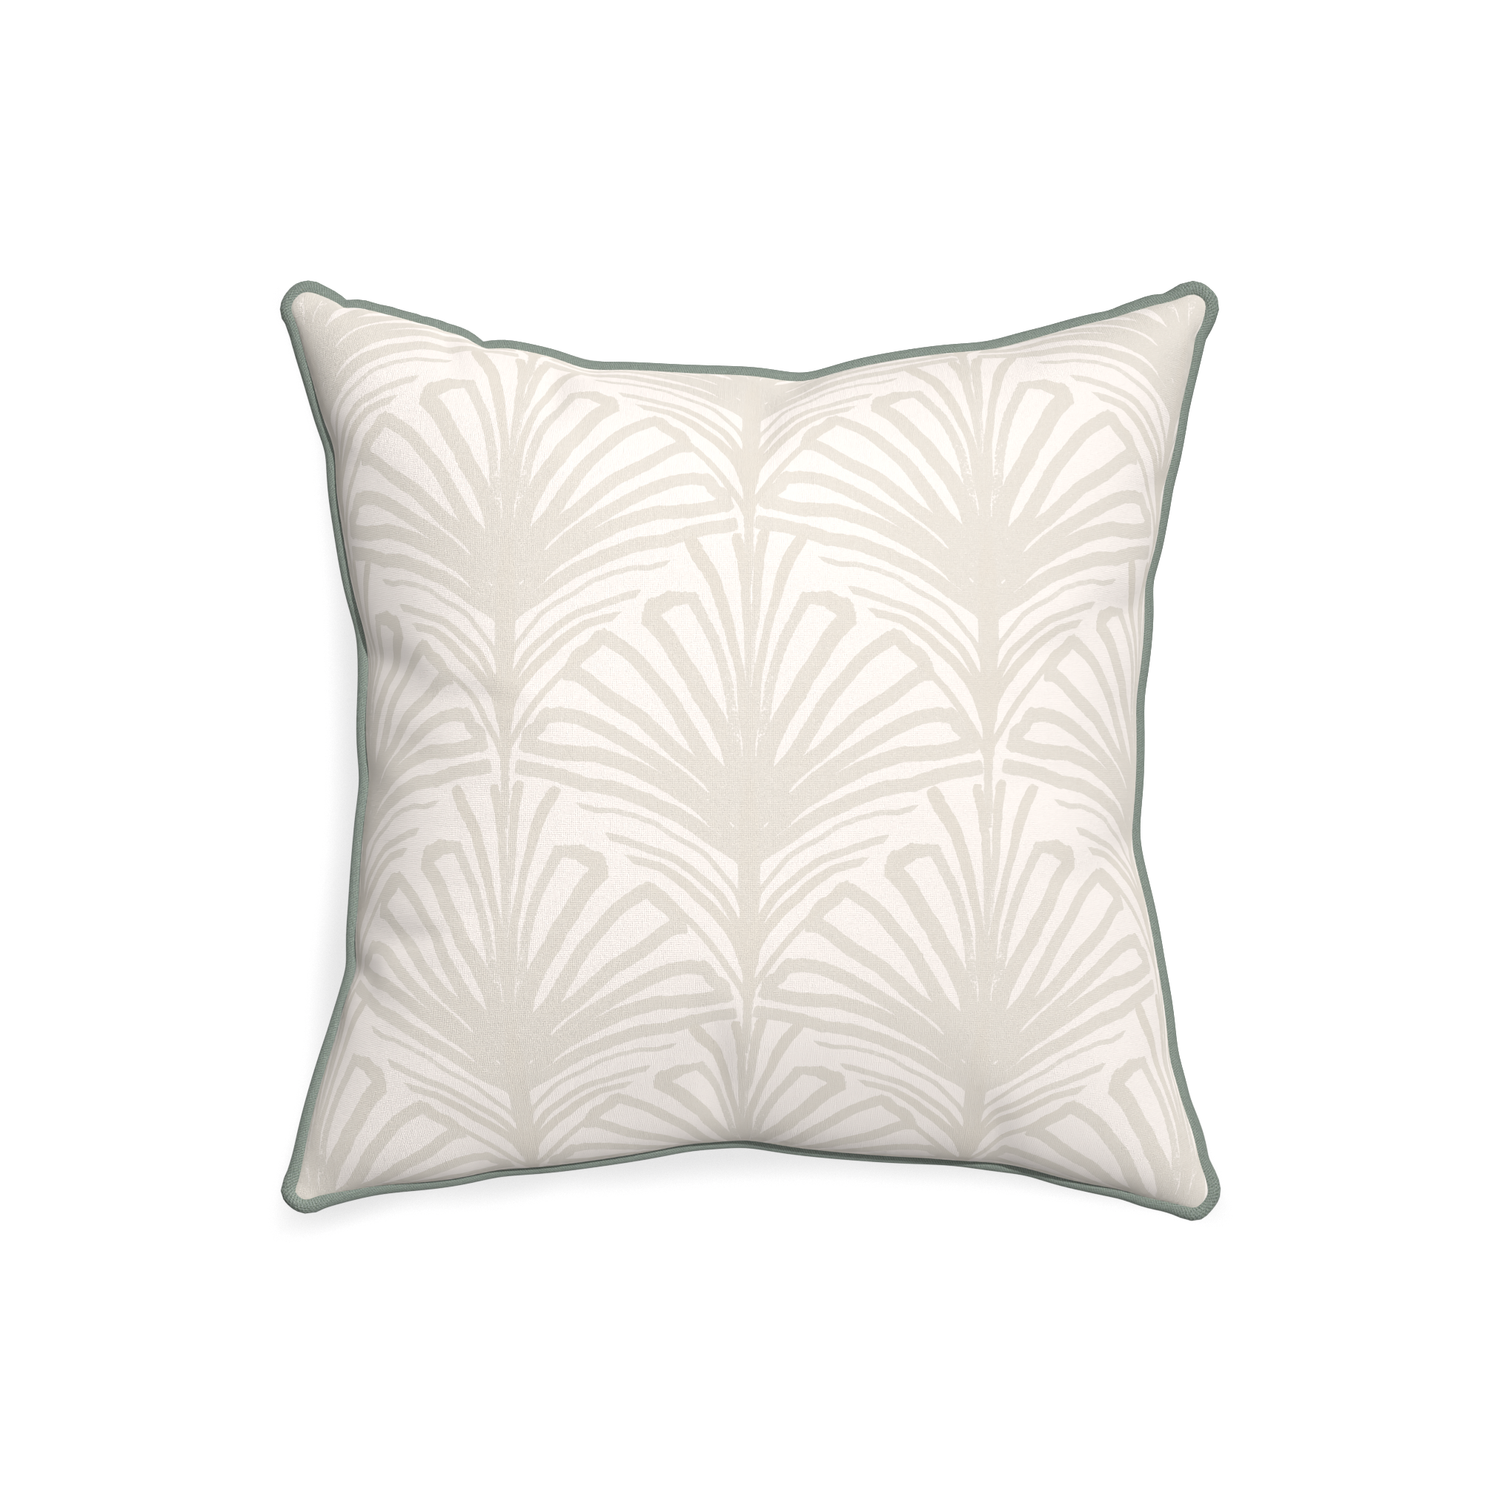 20-square suzy sand custom beige palmpillow with sage piping on white background